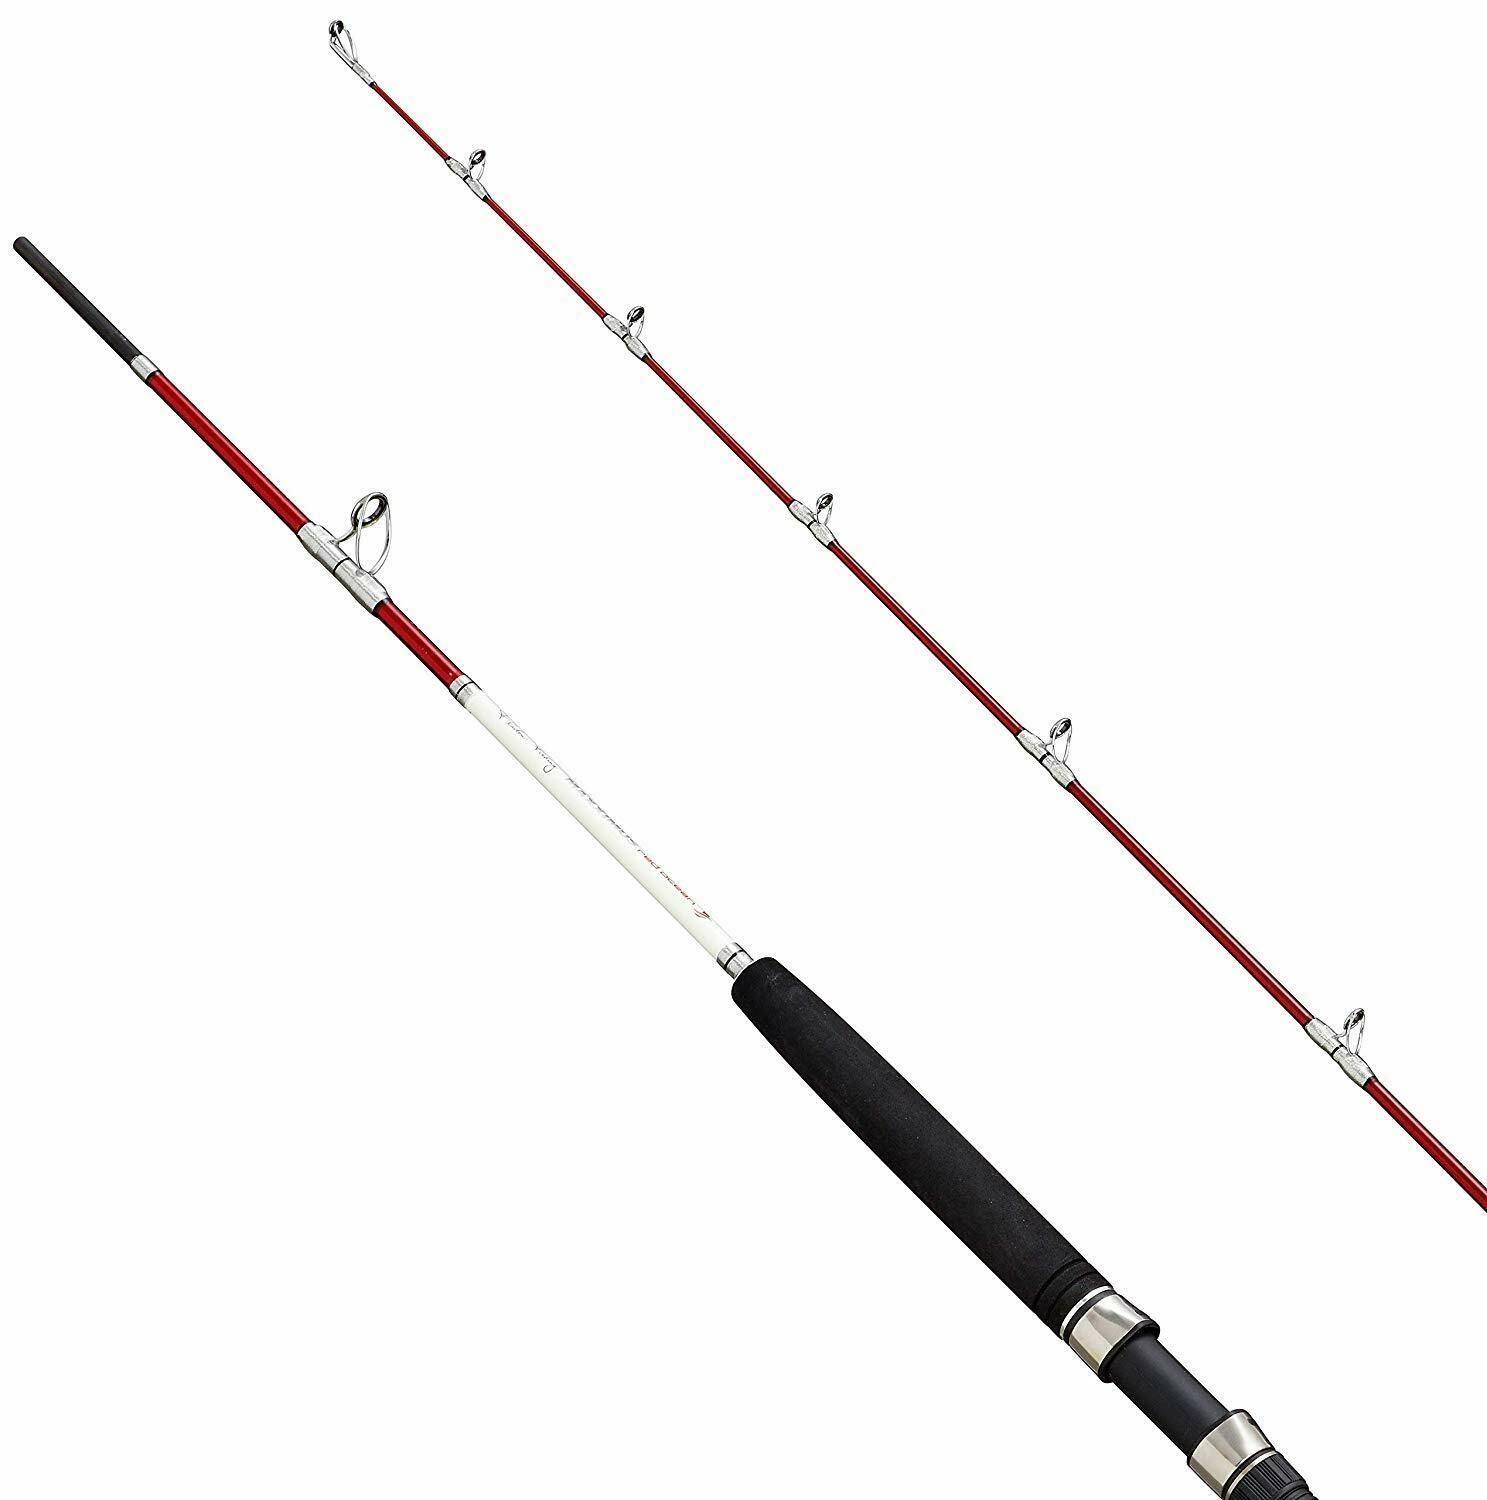 Fladen Maxximus STS Red Ocen carbon boat rod – 7ft 12lb